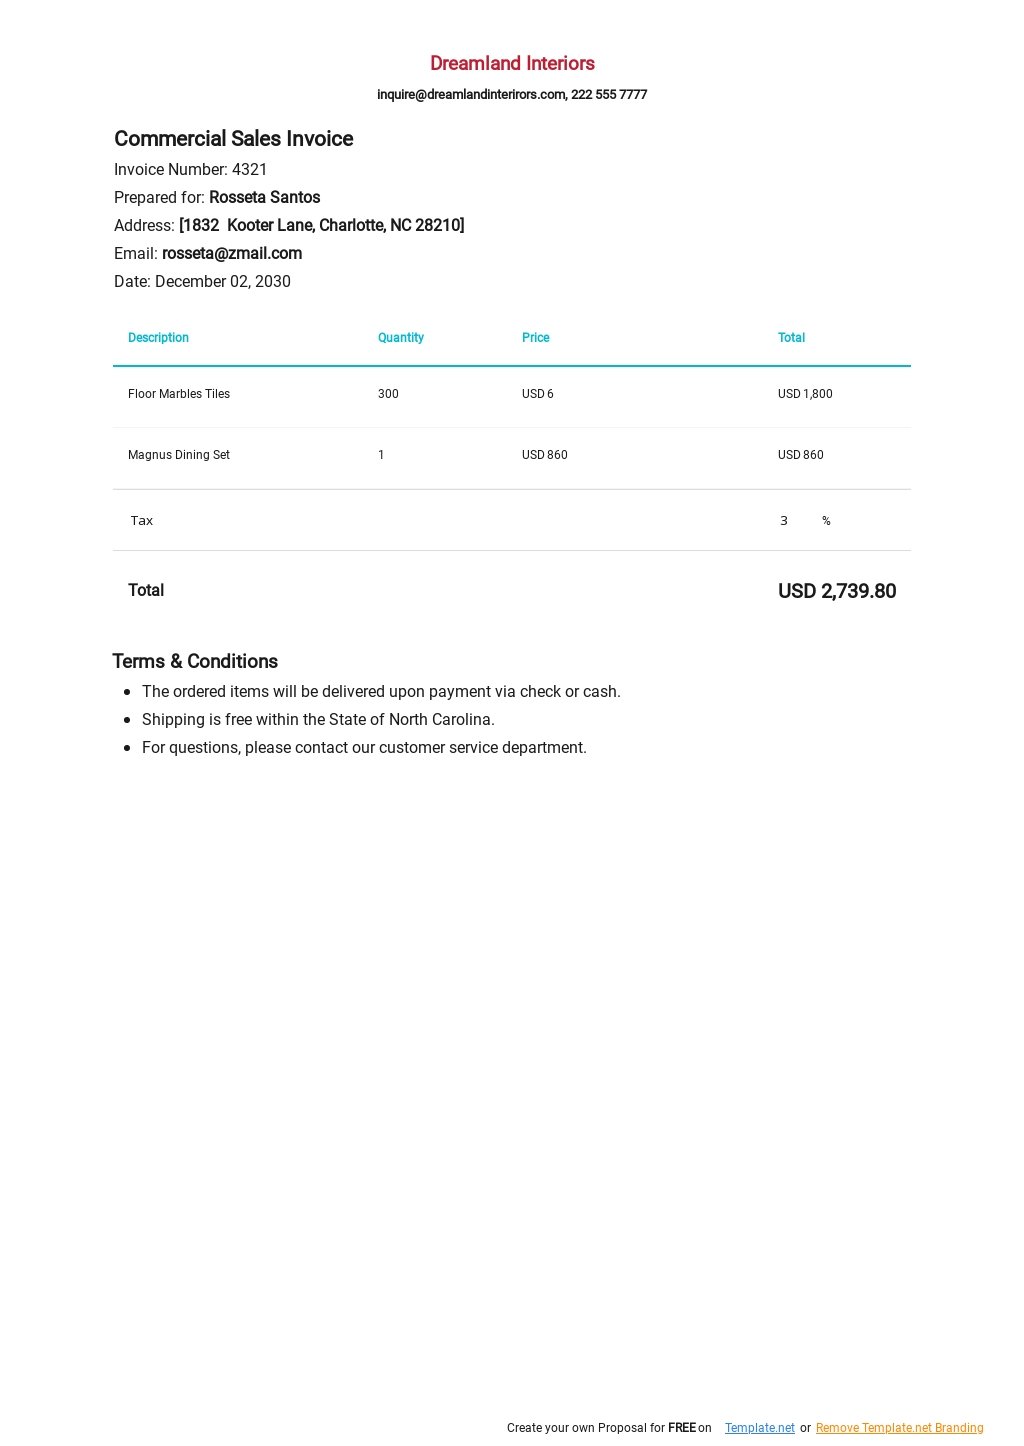 Commercial Sales Invoice Template.jpe